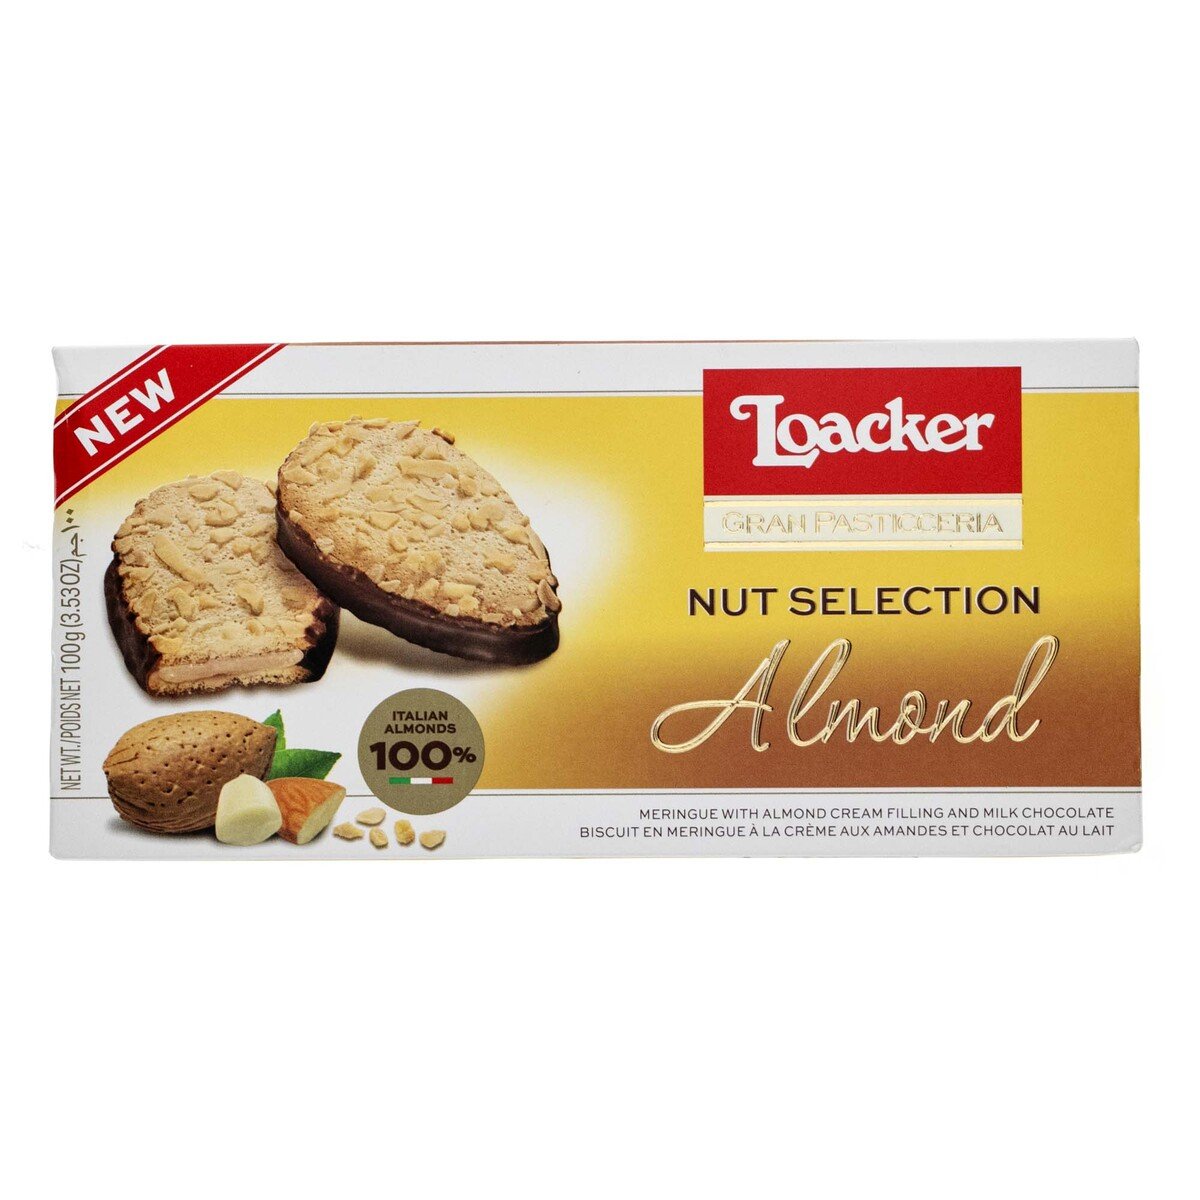 Buy Loacker Nut Selection Almond Biscuits 100 g Online at Best Price | Wafer Biscuits | Lulu KSA in Saudi Arabia